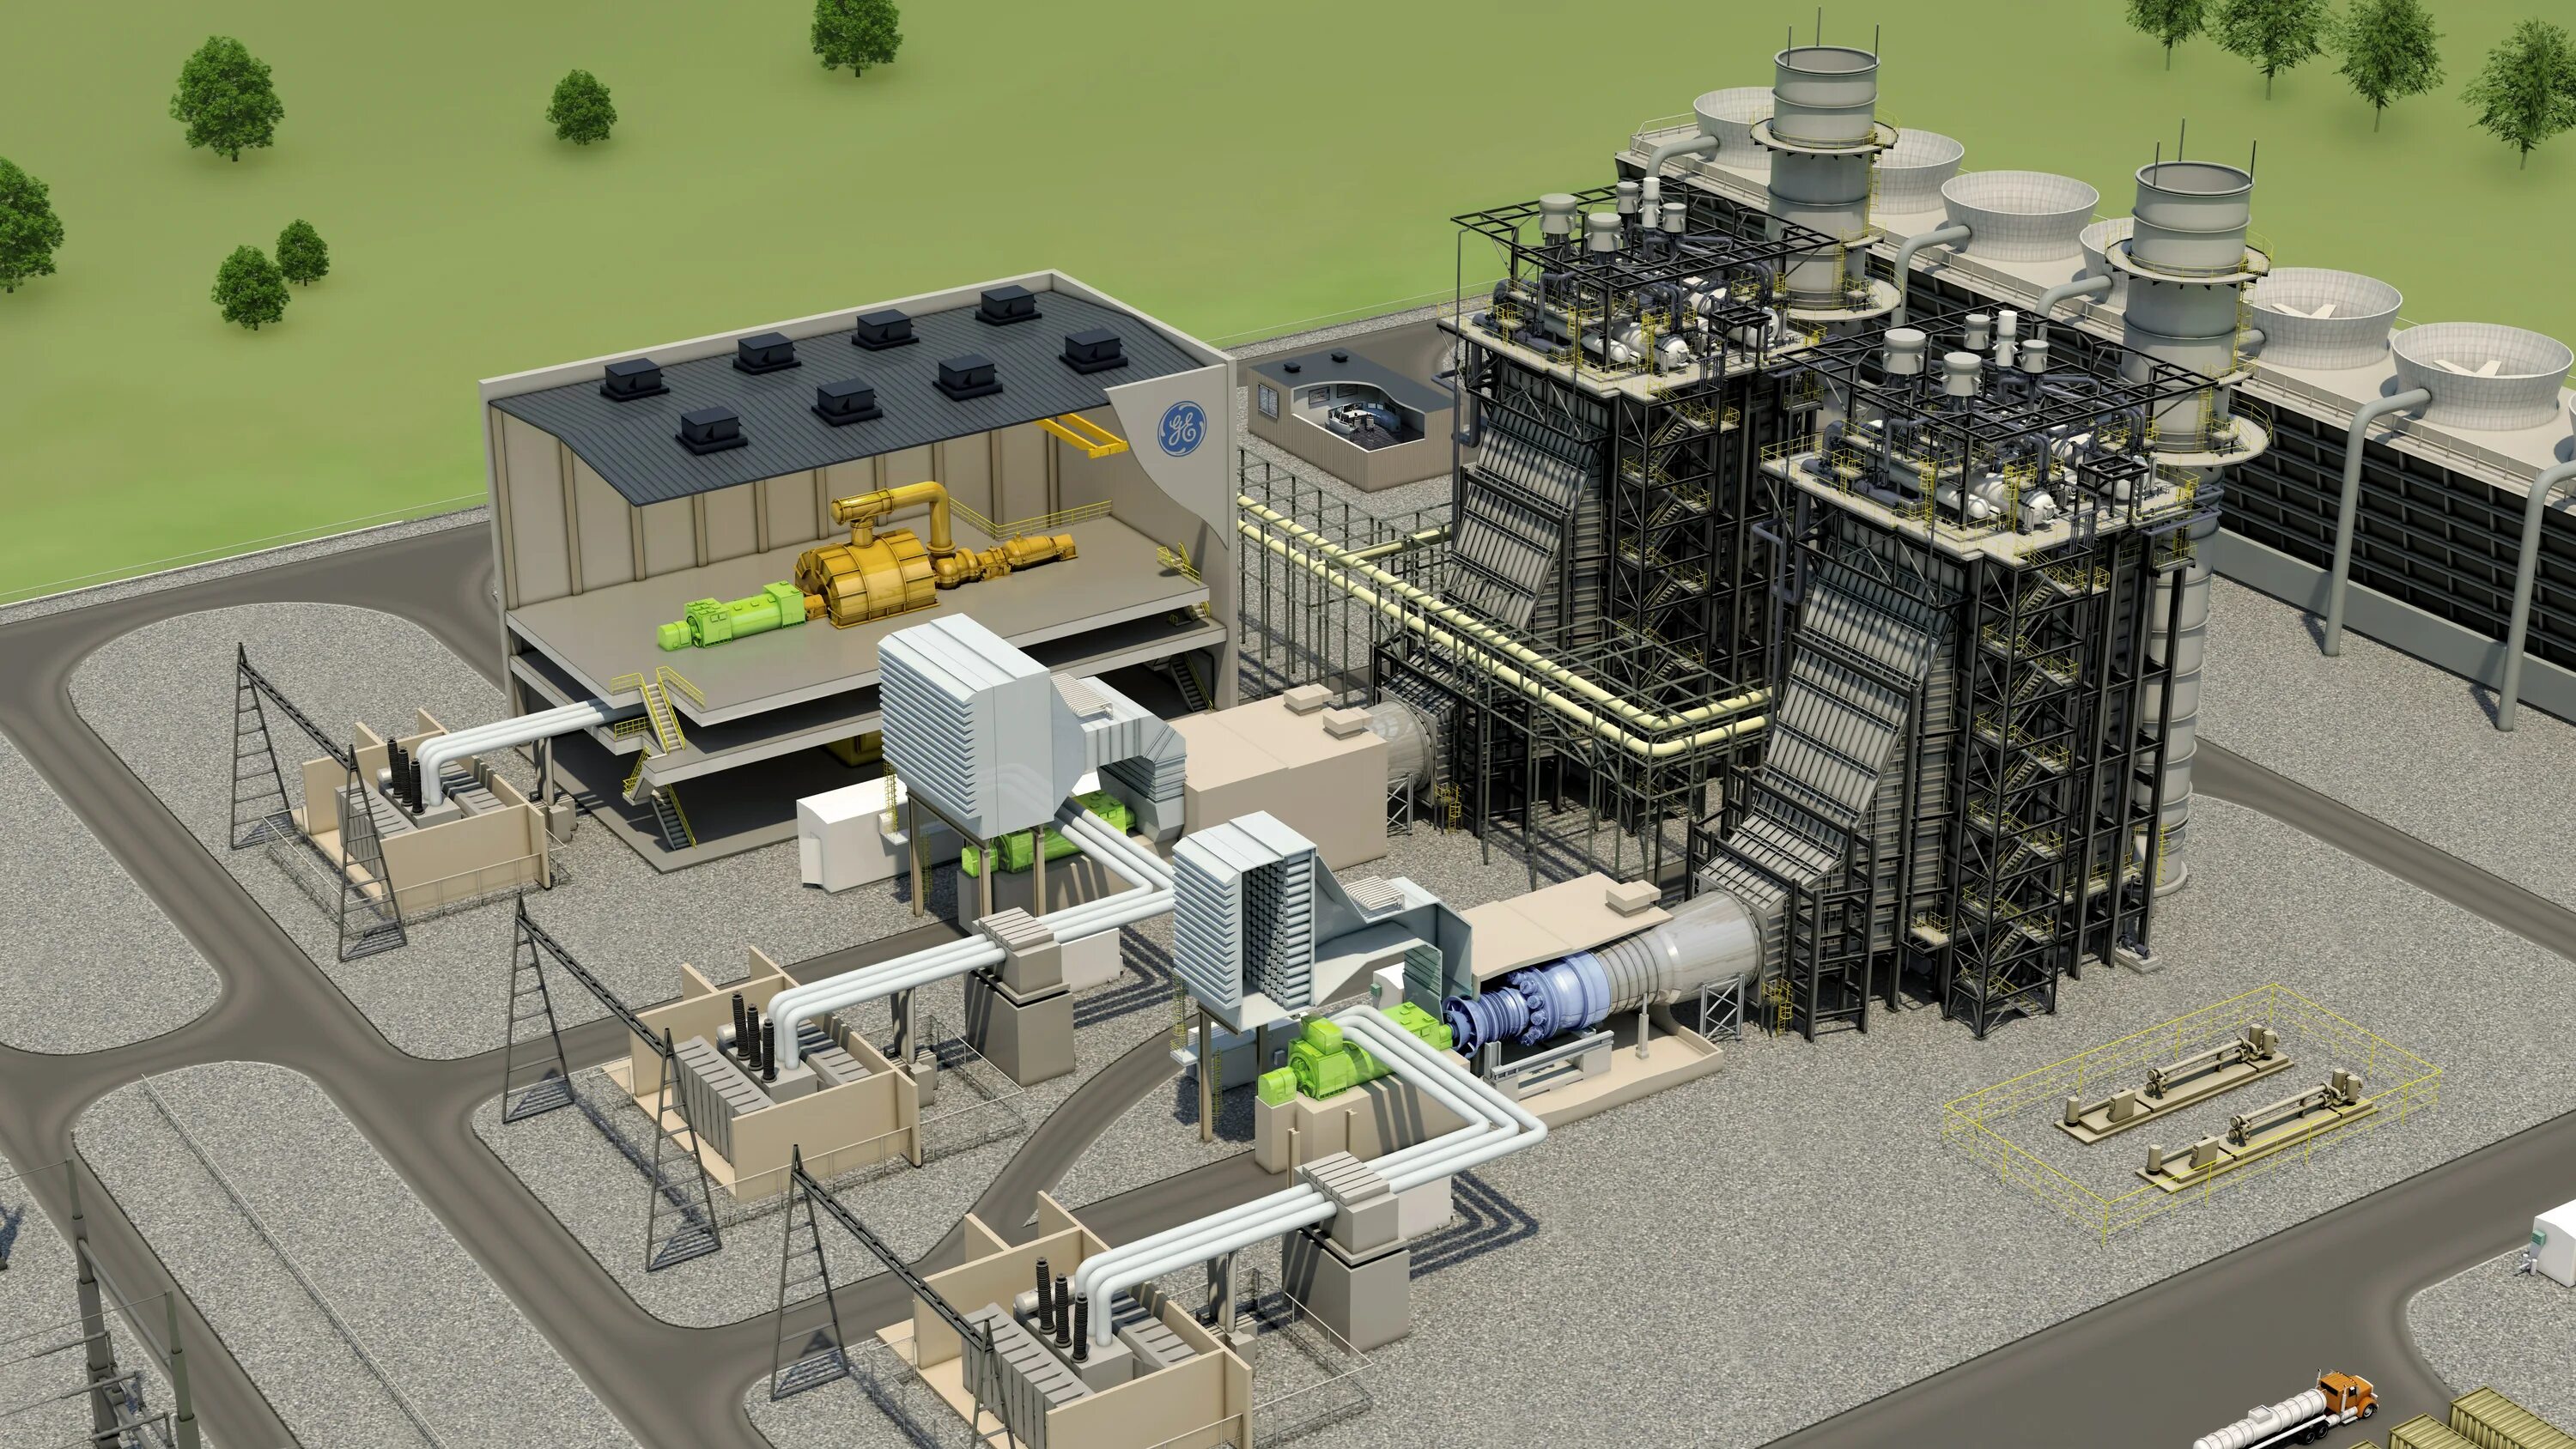 Power plant 3. Gas Power Plant Siemens. Combined Cycle Power Plant. Gas Turbine combined Cycle. Gas Turbine Power Plant.